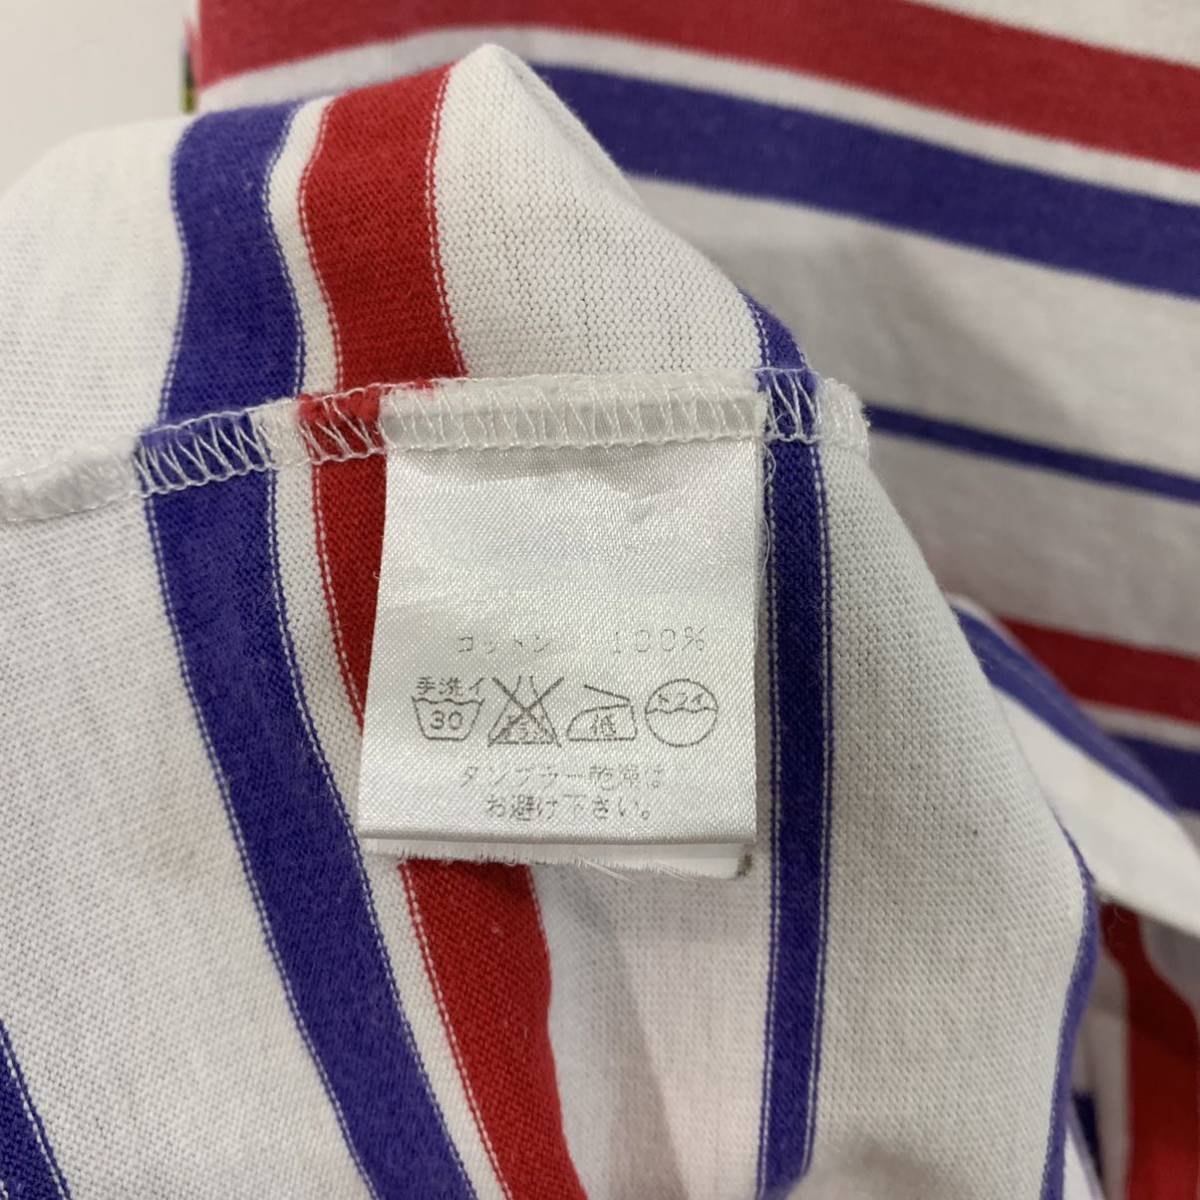 Le minor France made bus k shirt border cut and sewn border T-shirt standard finest quality one Point Le Minor [ letter pack post service plus mailing possible ]E